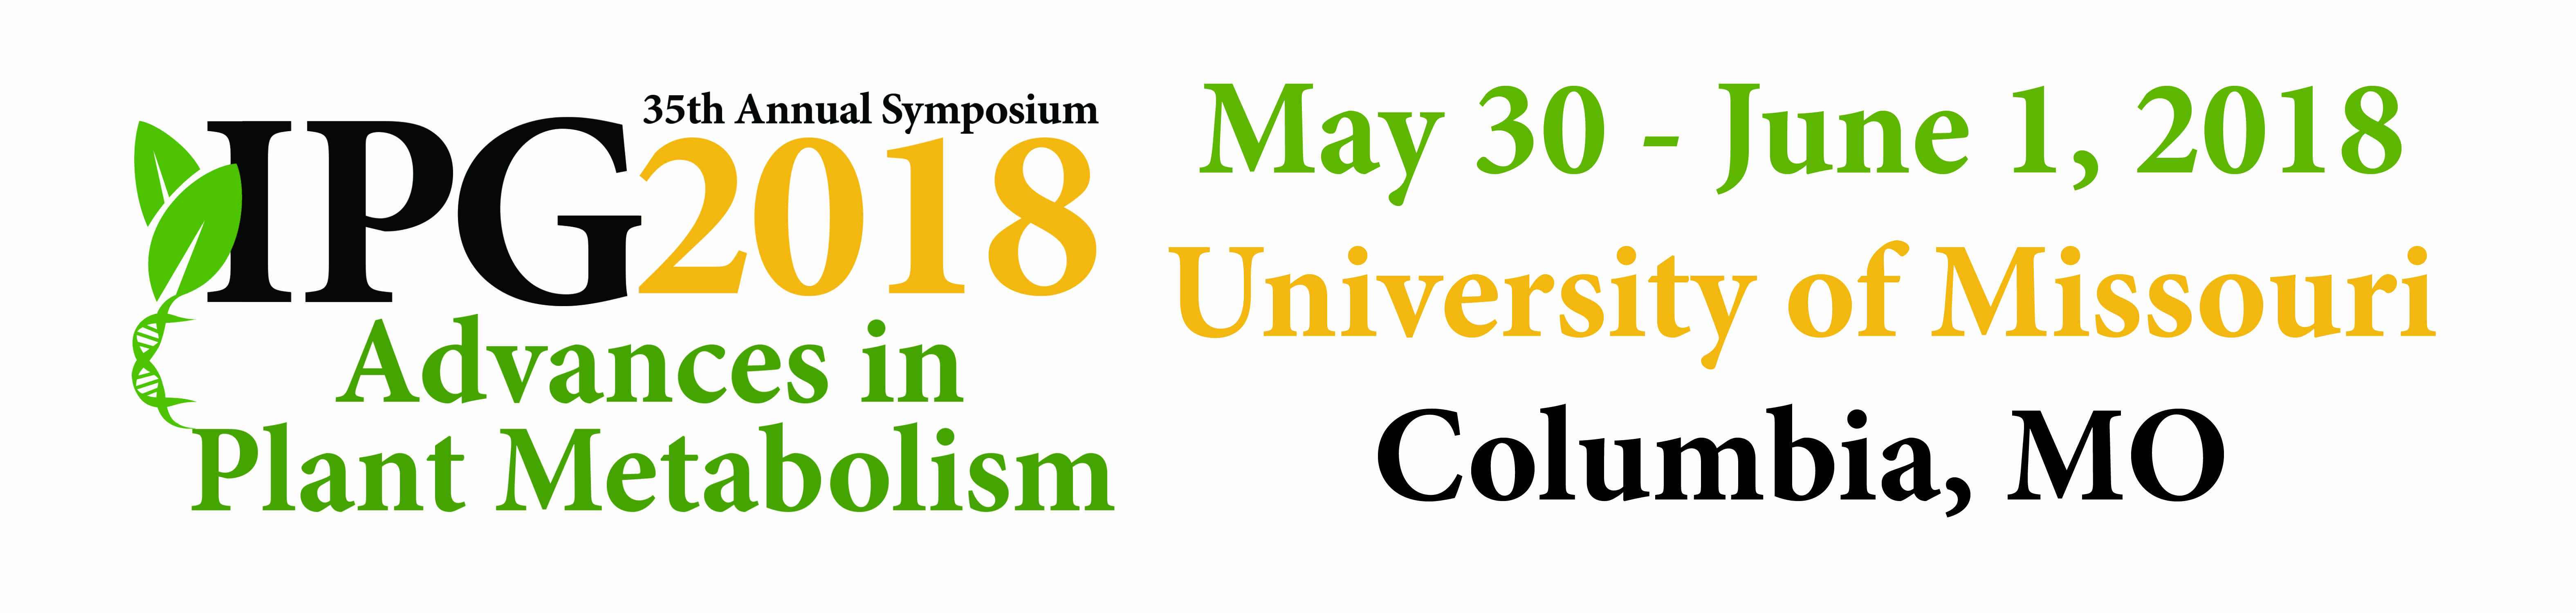 IPG 2016 33rd Annual Symposium, Heterosis:Working Toward a Genetic, Molecular, Developmental and Physiological Bases. May 25-27, 2016. Interdisipinary Plant Group, Univeristy of Missouri, Columbia, MO.